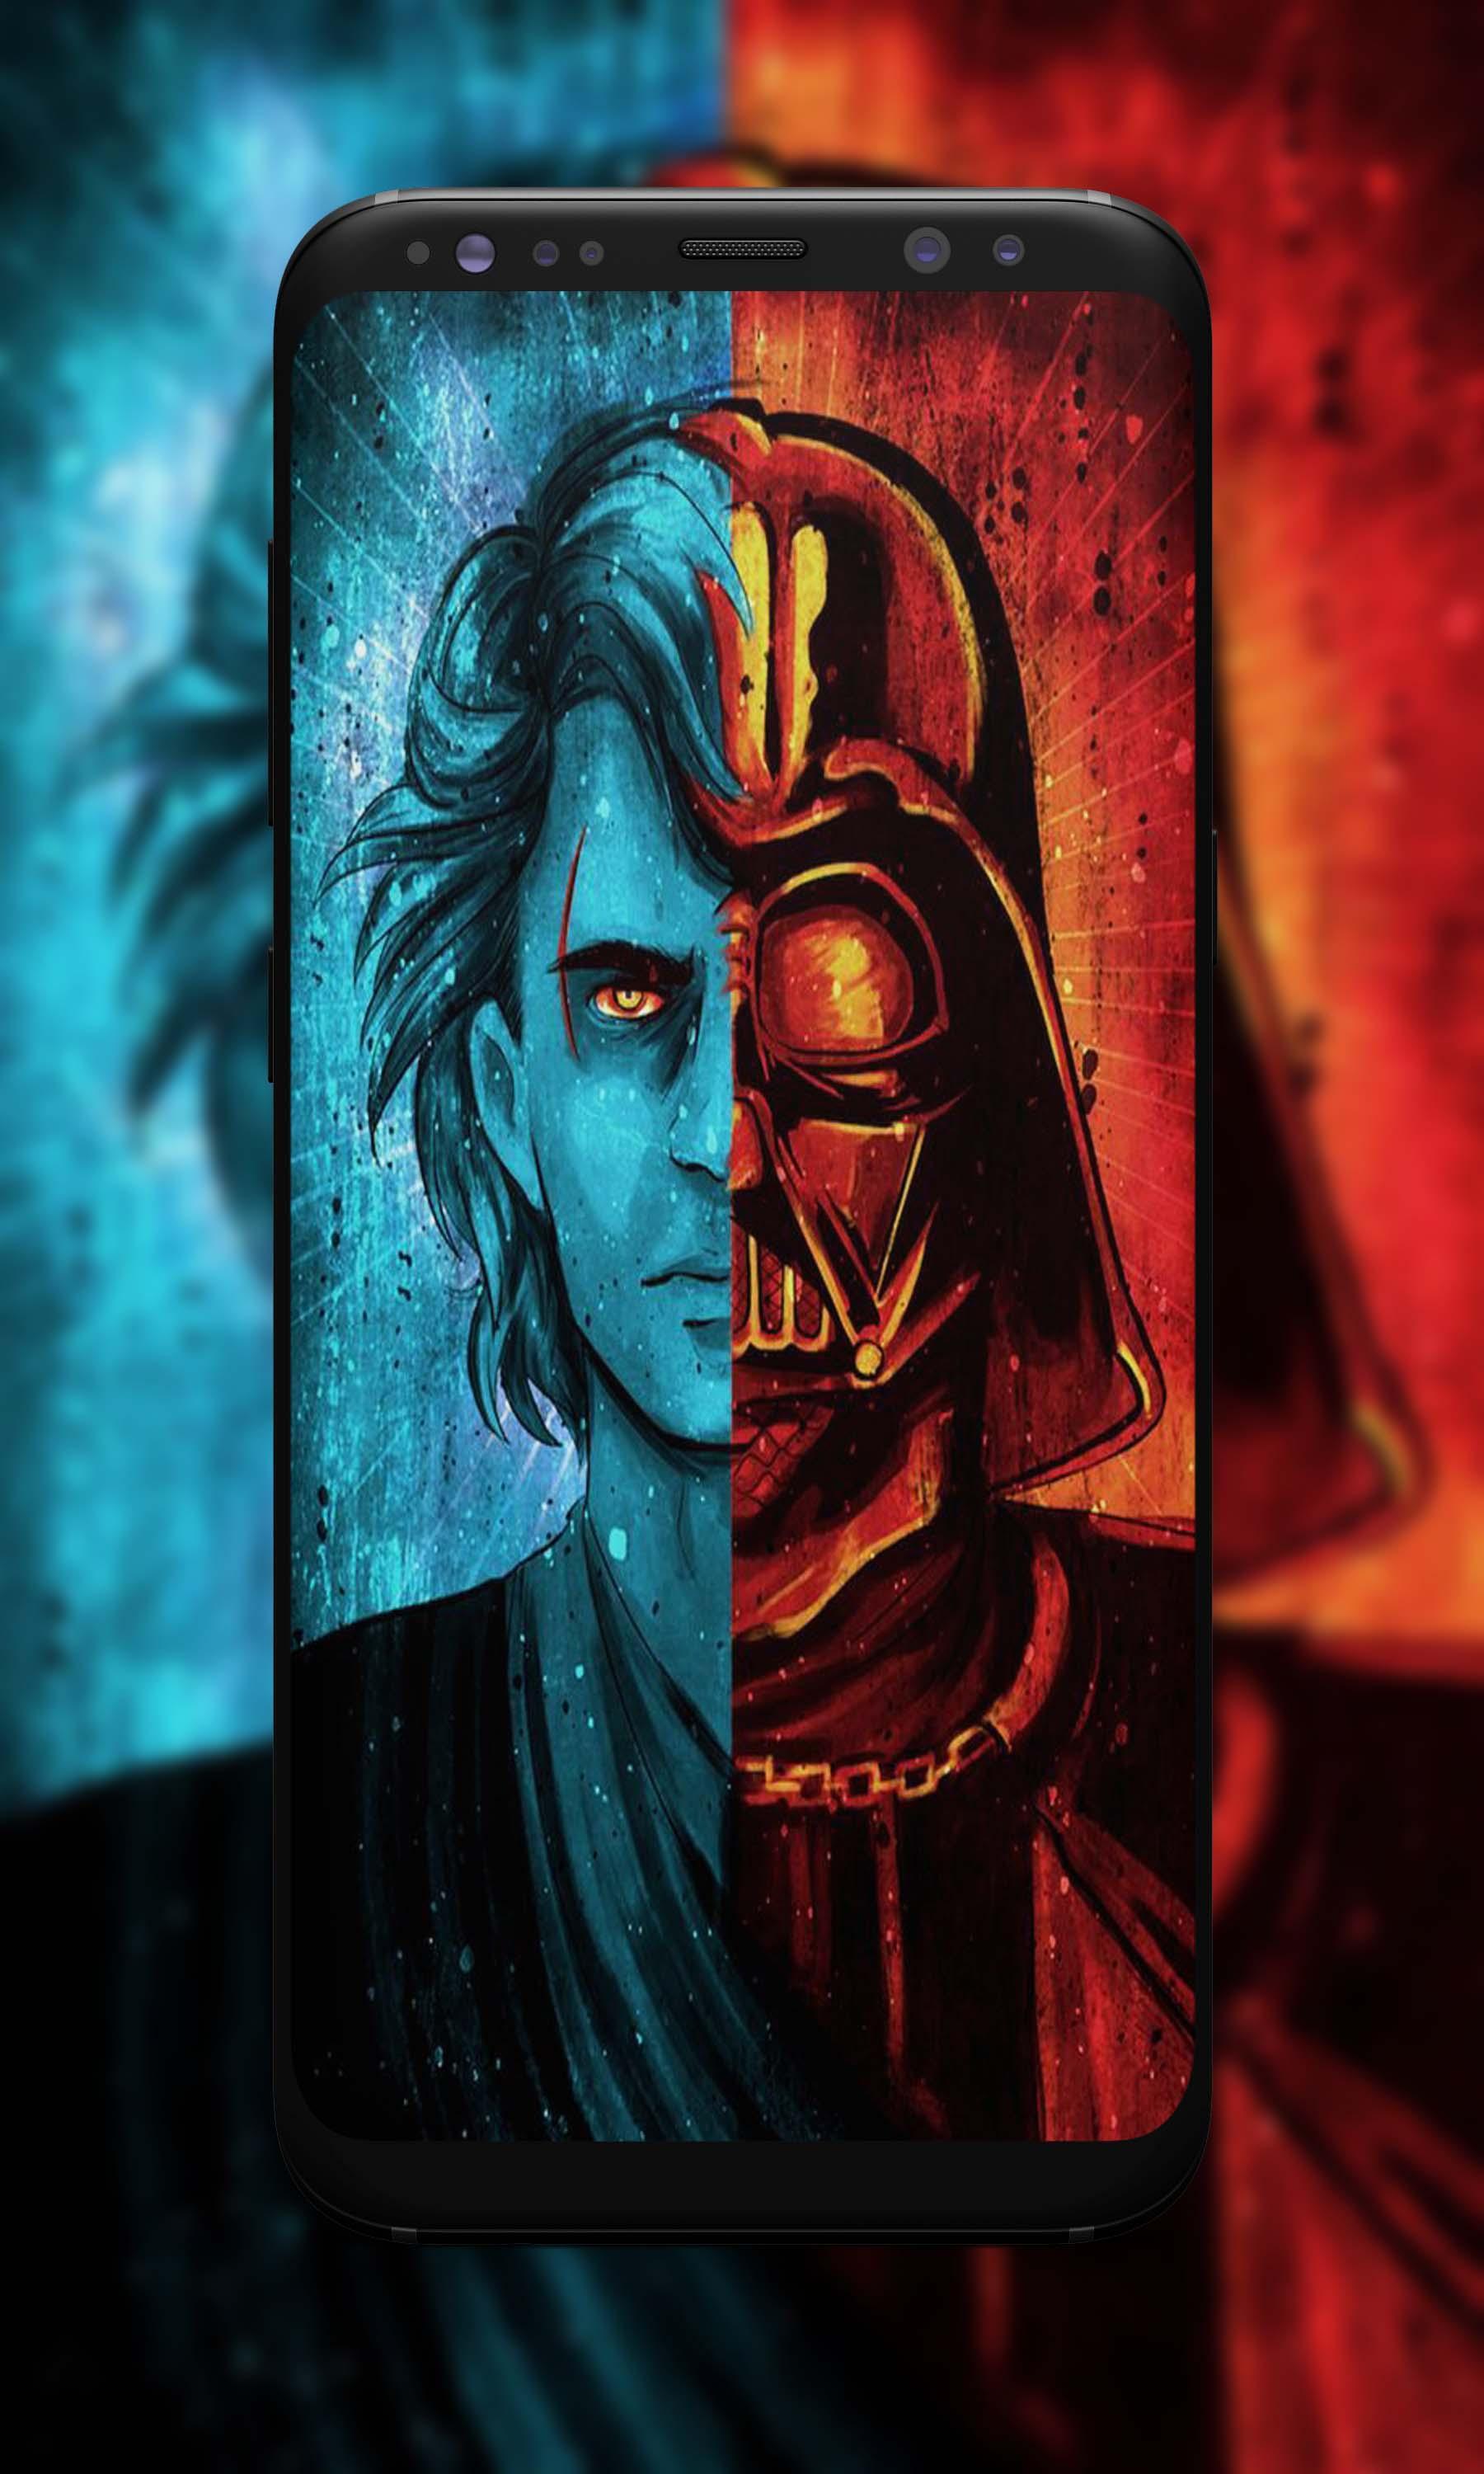 Starwars Wallpaper Hd For Android Apk Download